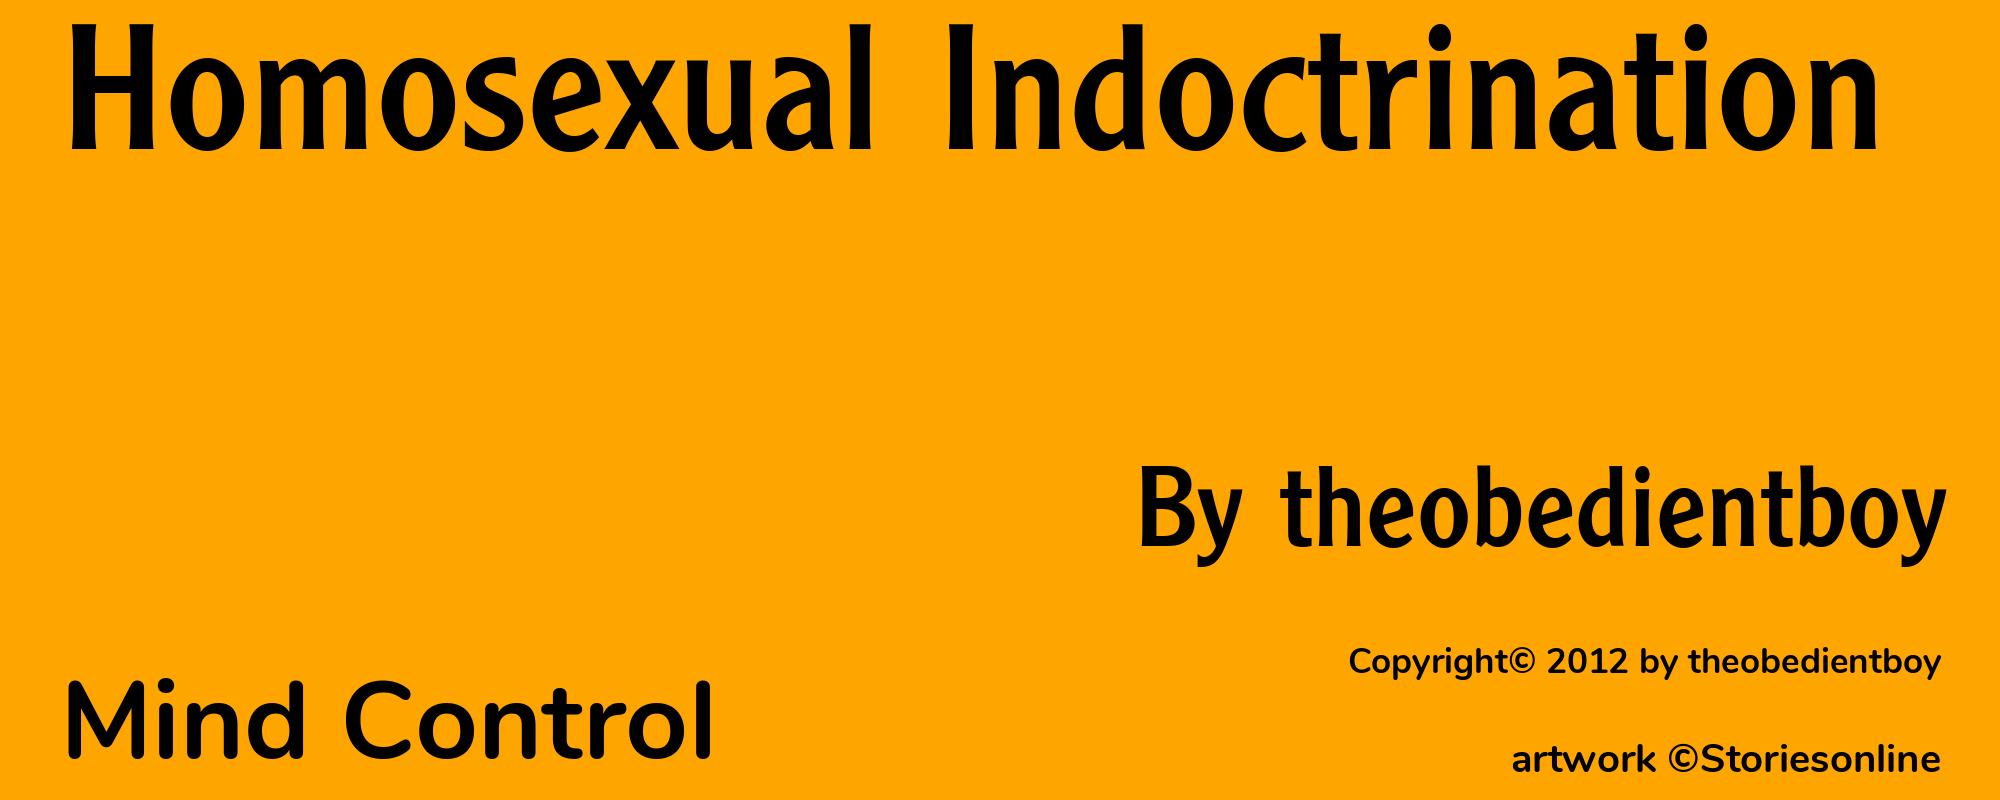 Homosexual Indoctrination - Cover